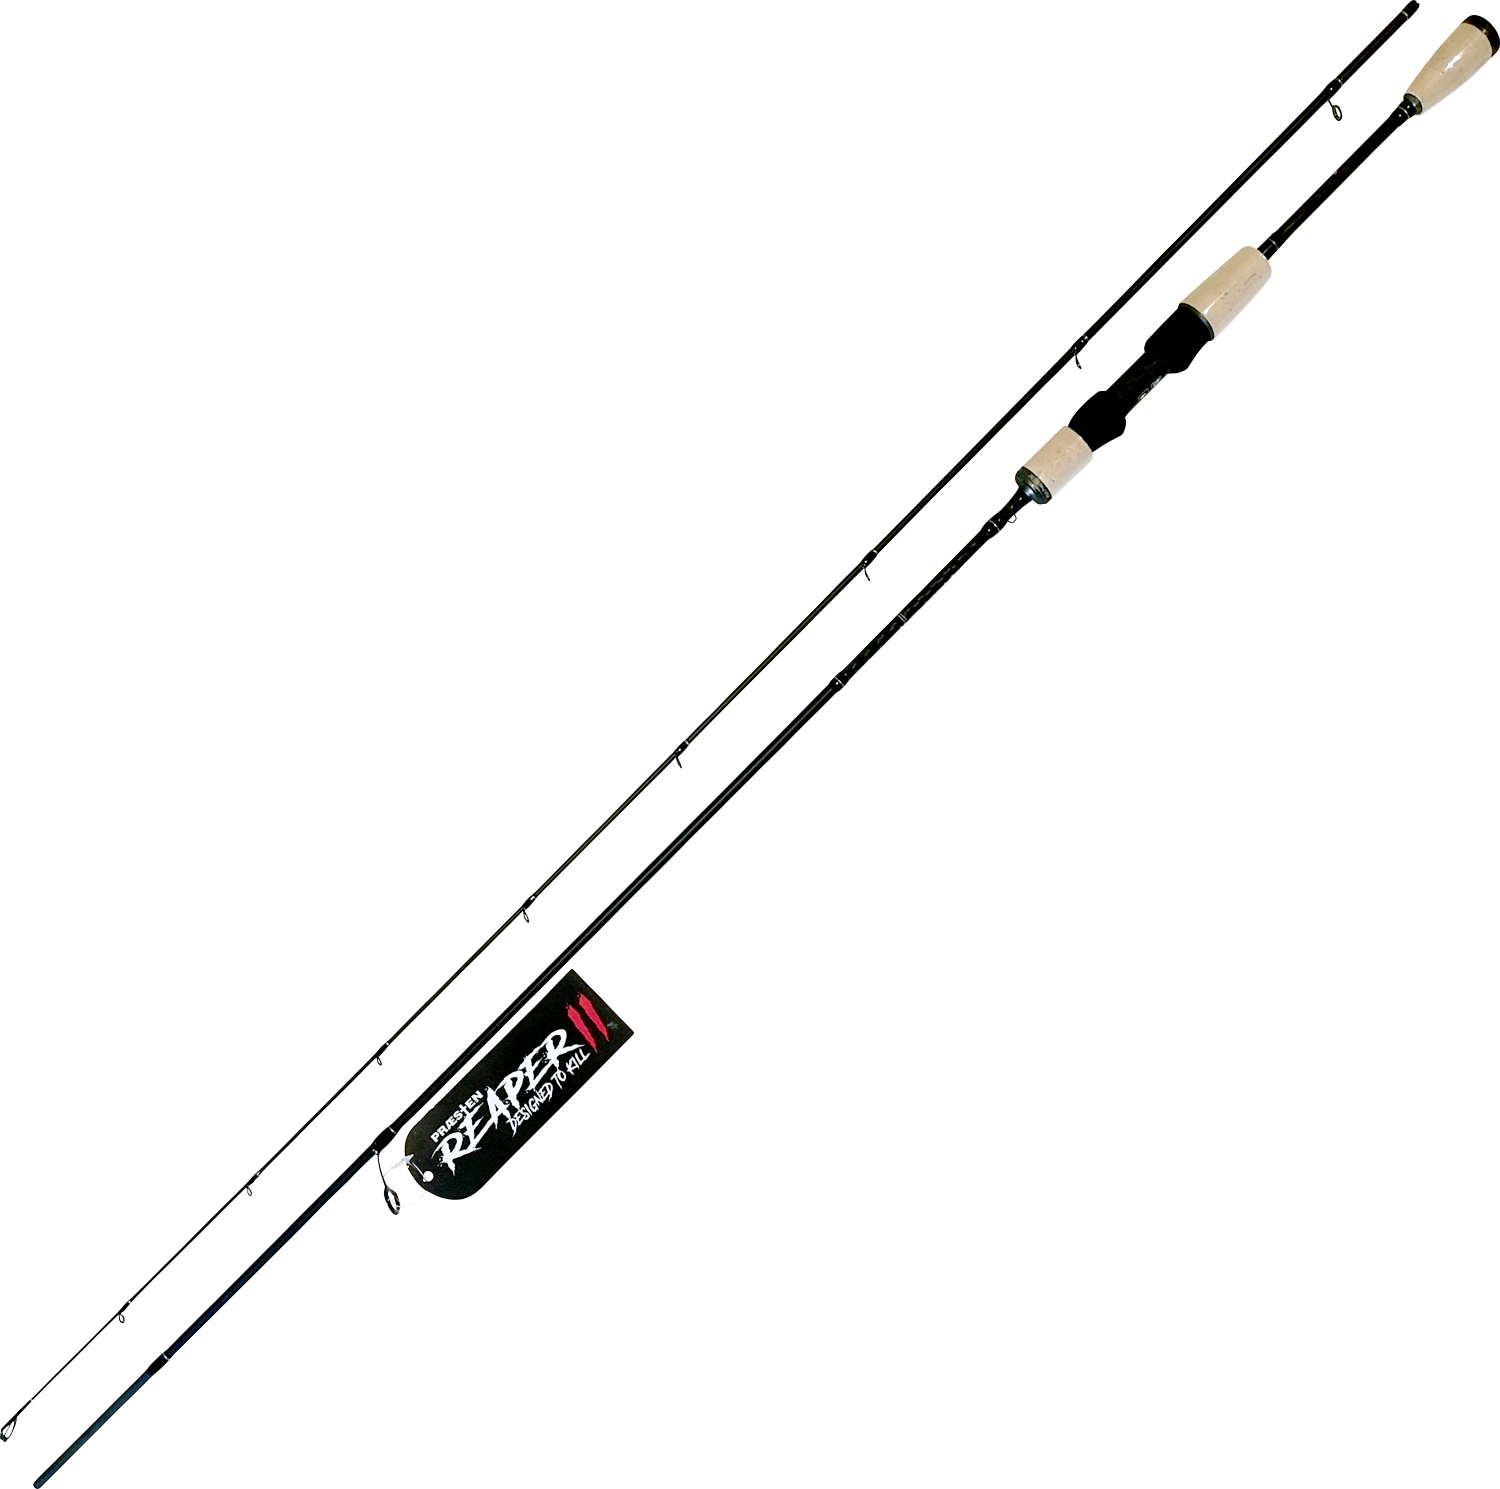 OGP Fishing rod Præsten Reaper II at low prices